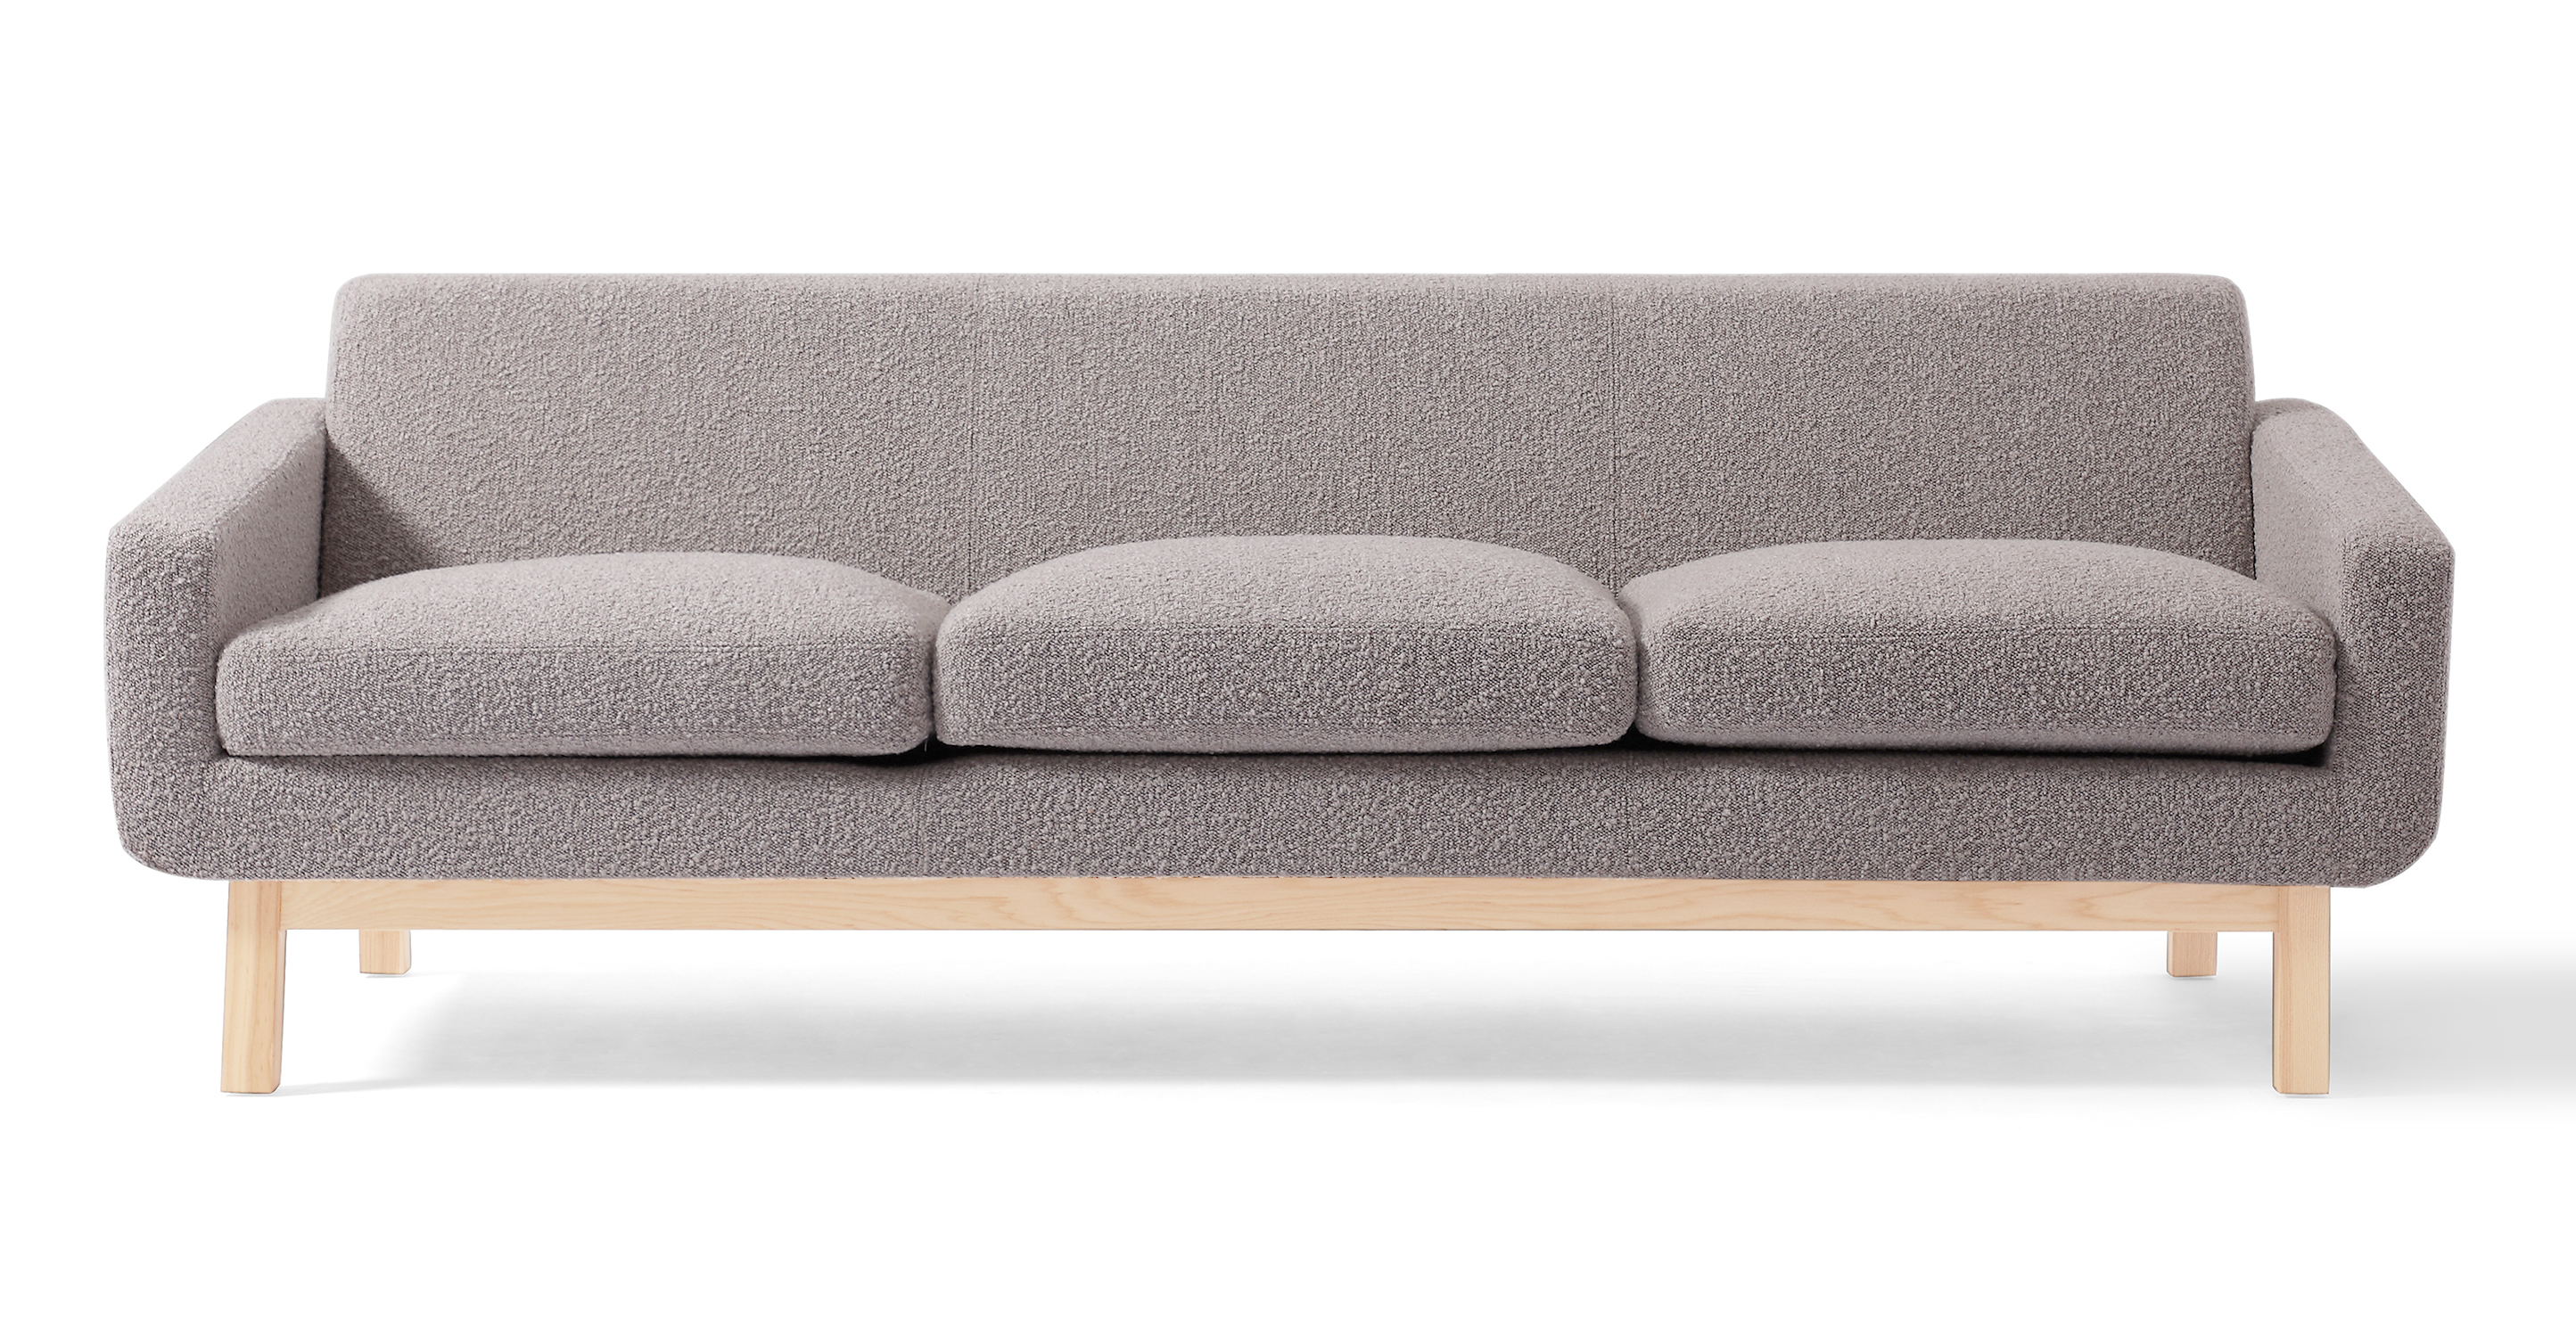 Platform sofa has an exposed natural wood frame, the back fame feet are angled sharper to create a relaxed decline. The back of the sofa is fixed and the three seat cushions are removable. The vibe is modern, simplistic, and classy.